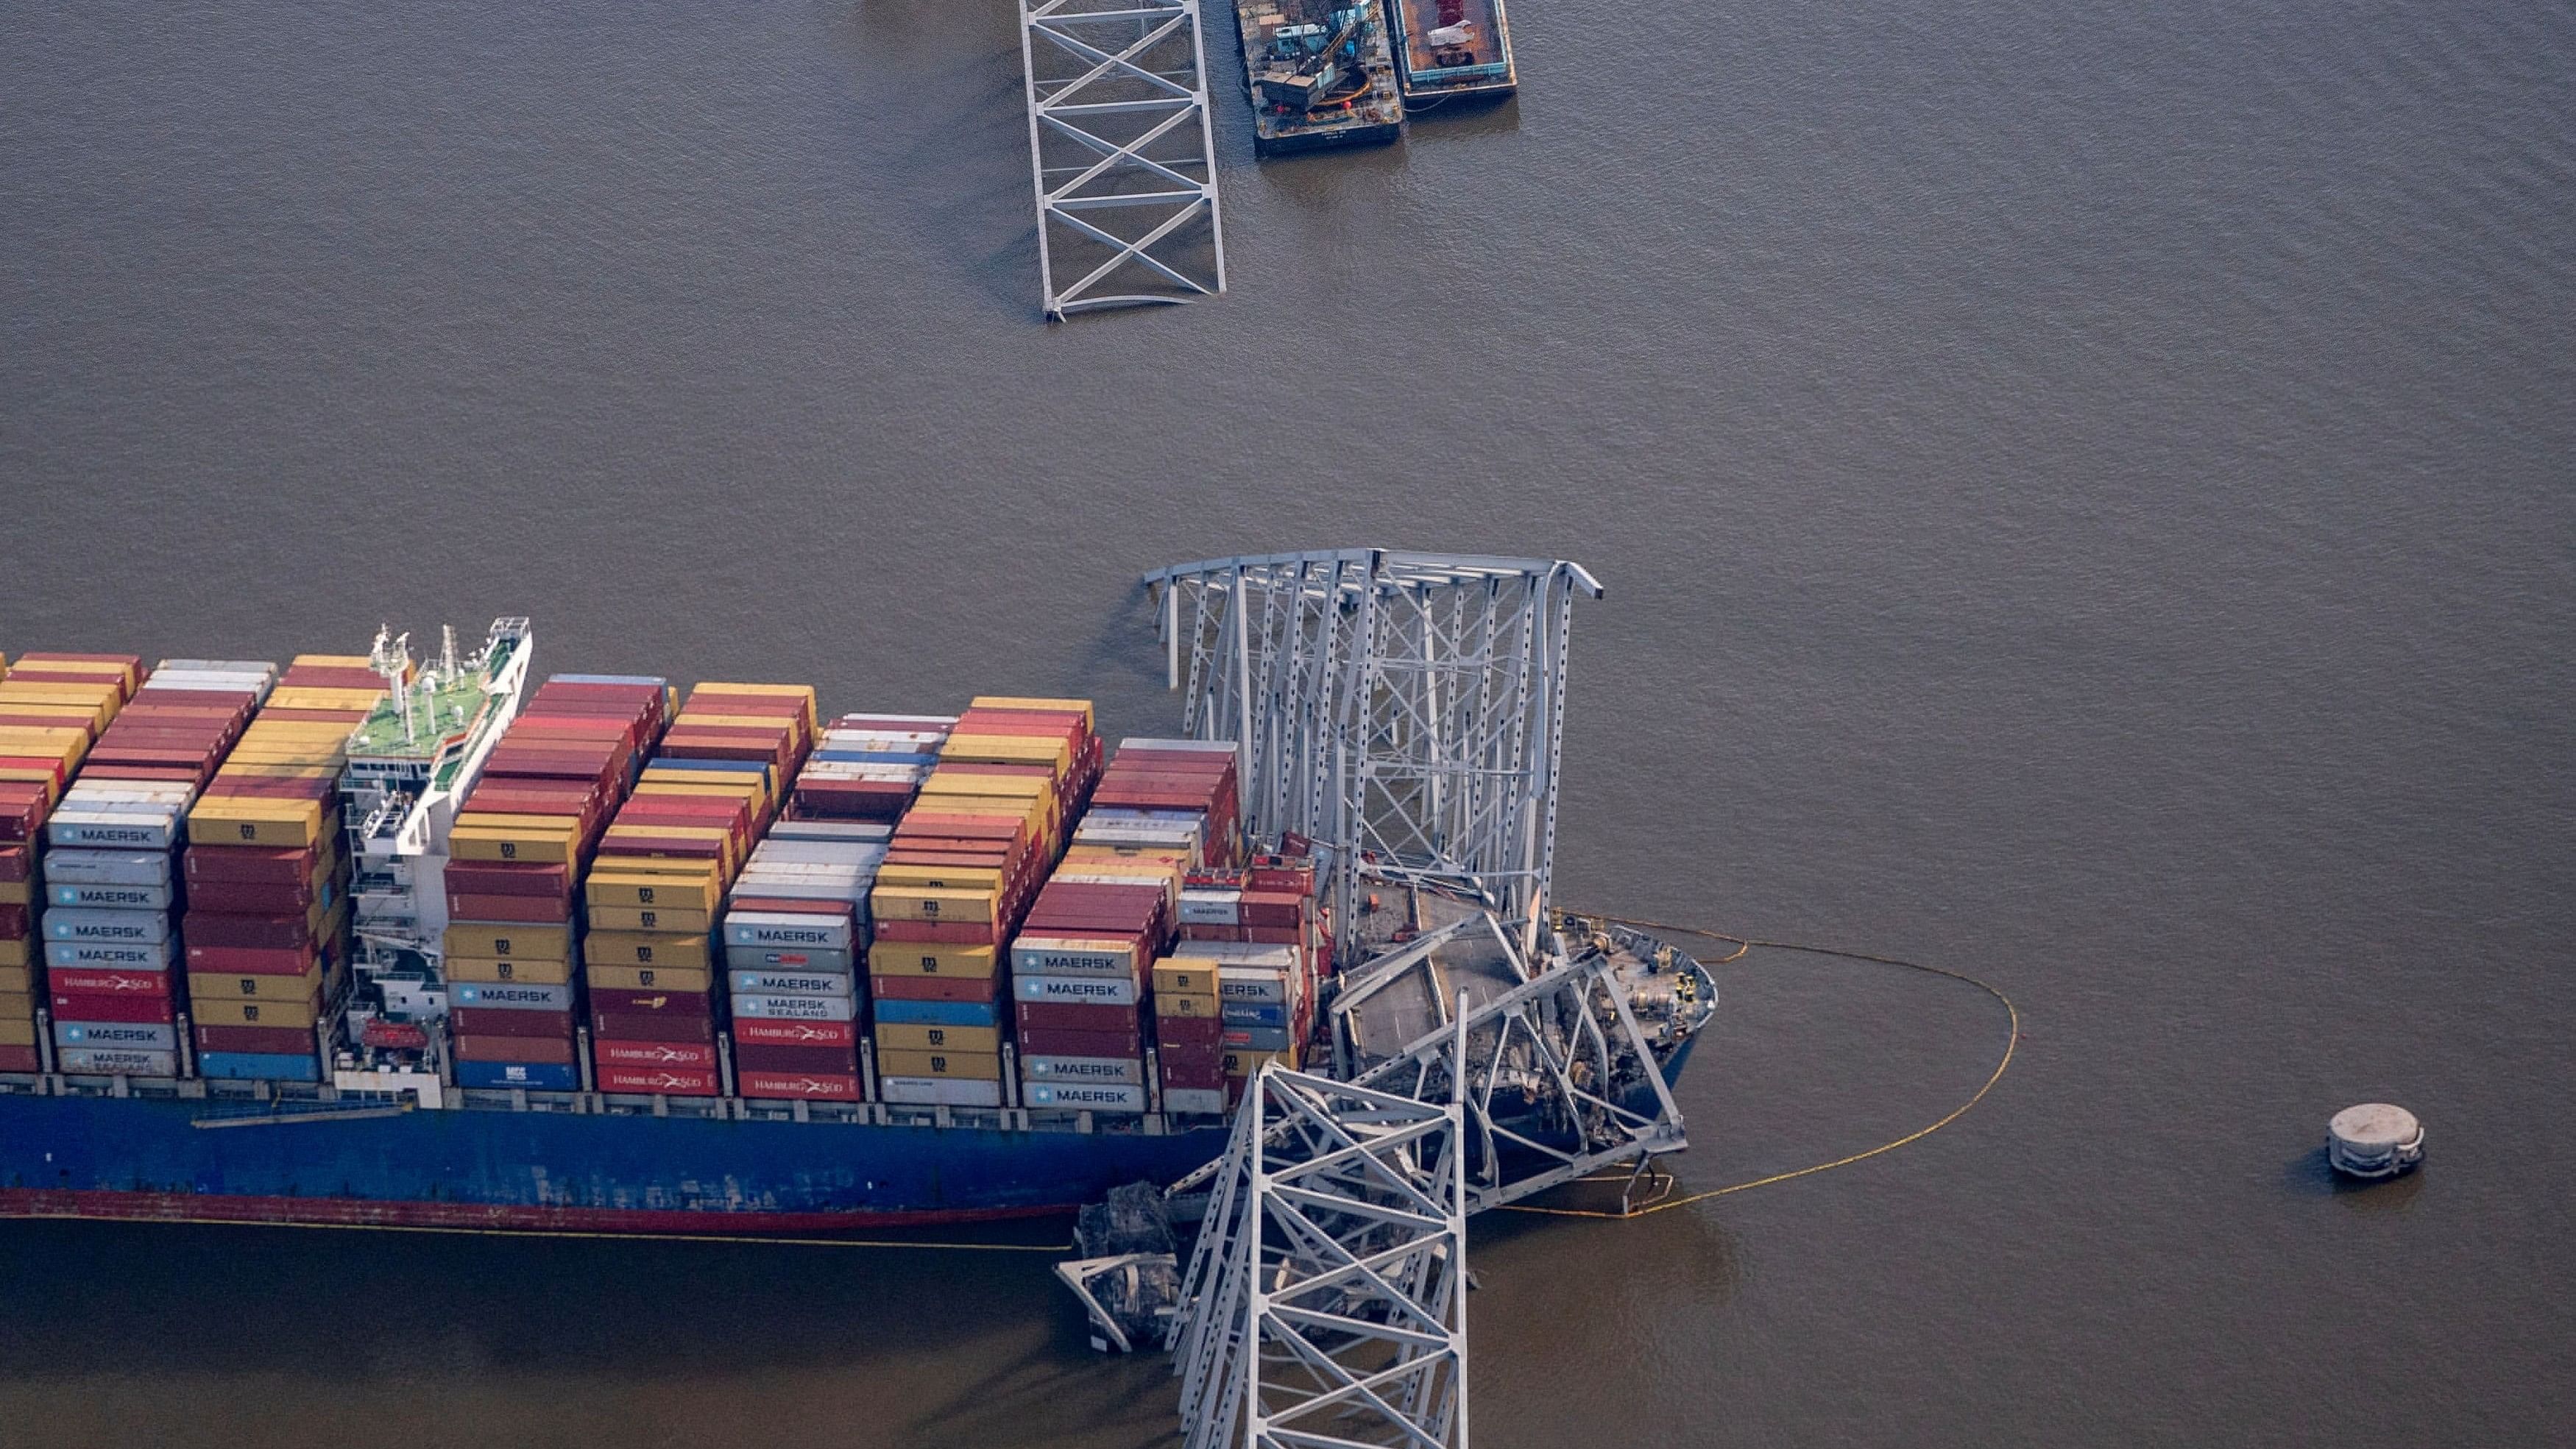 <div class="paragraphs"><p>View of the Dali cargo vessel which crashed into the Francis Scott Key Bridge causing it to collapse in Baltimore.</p></div>